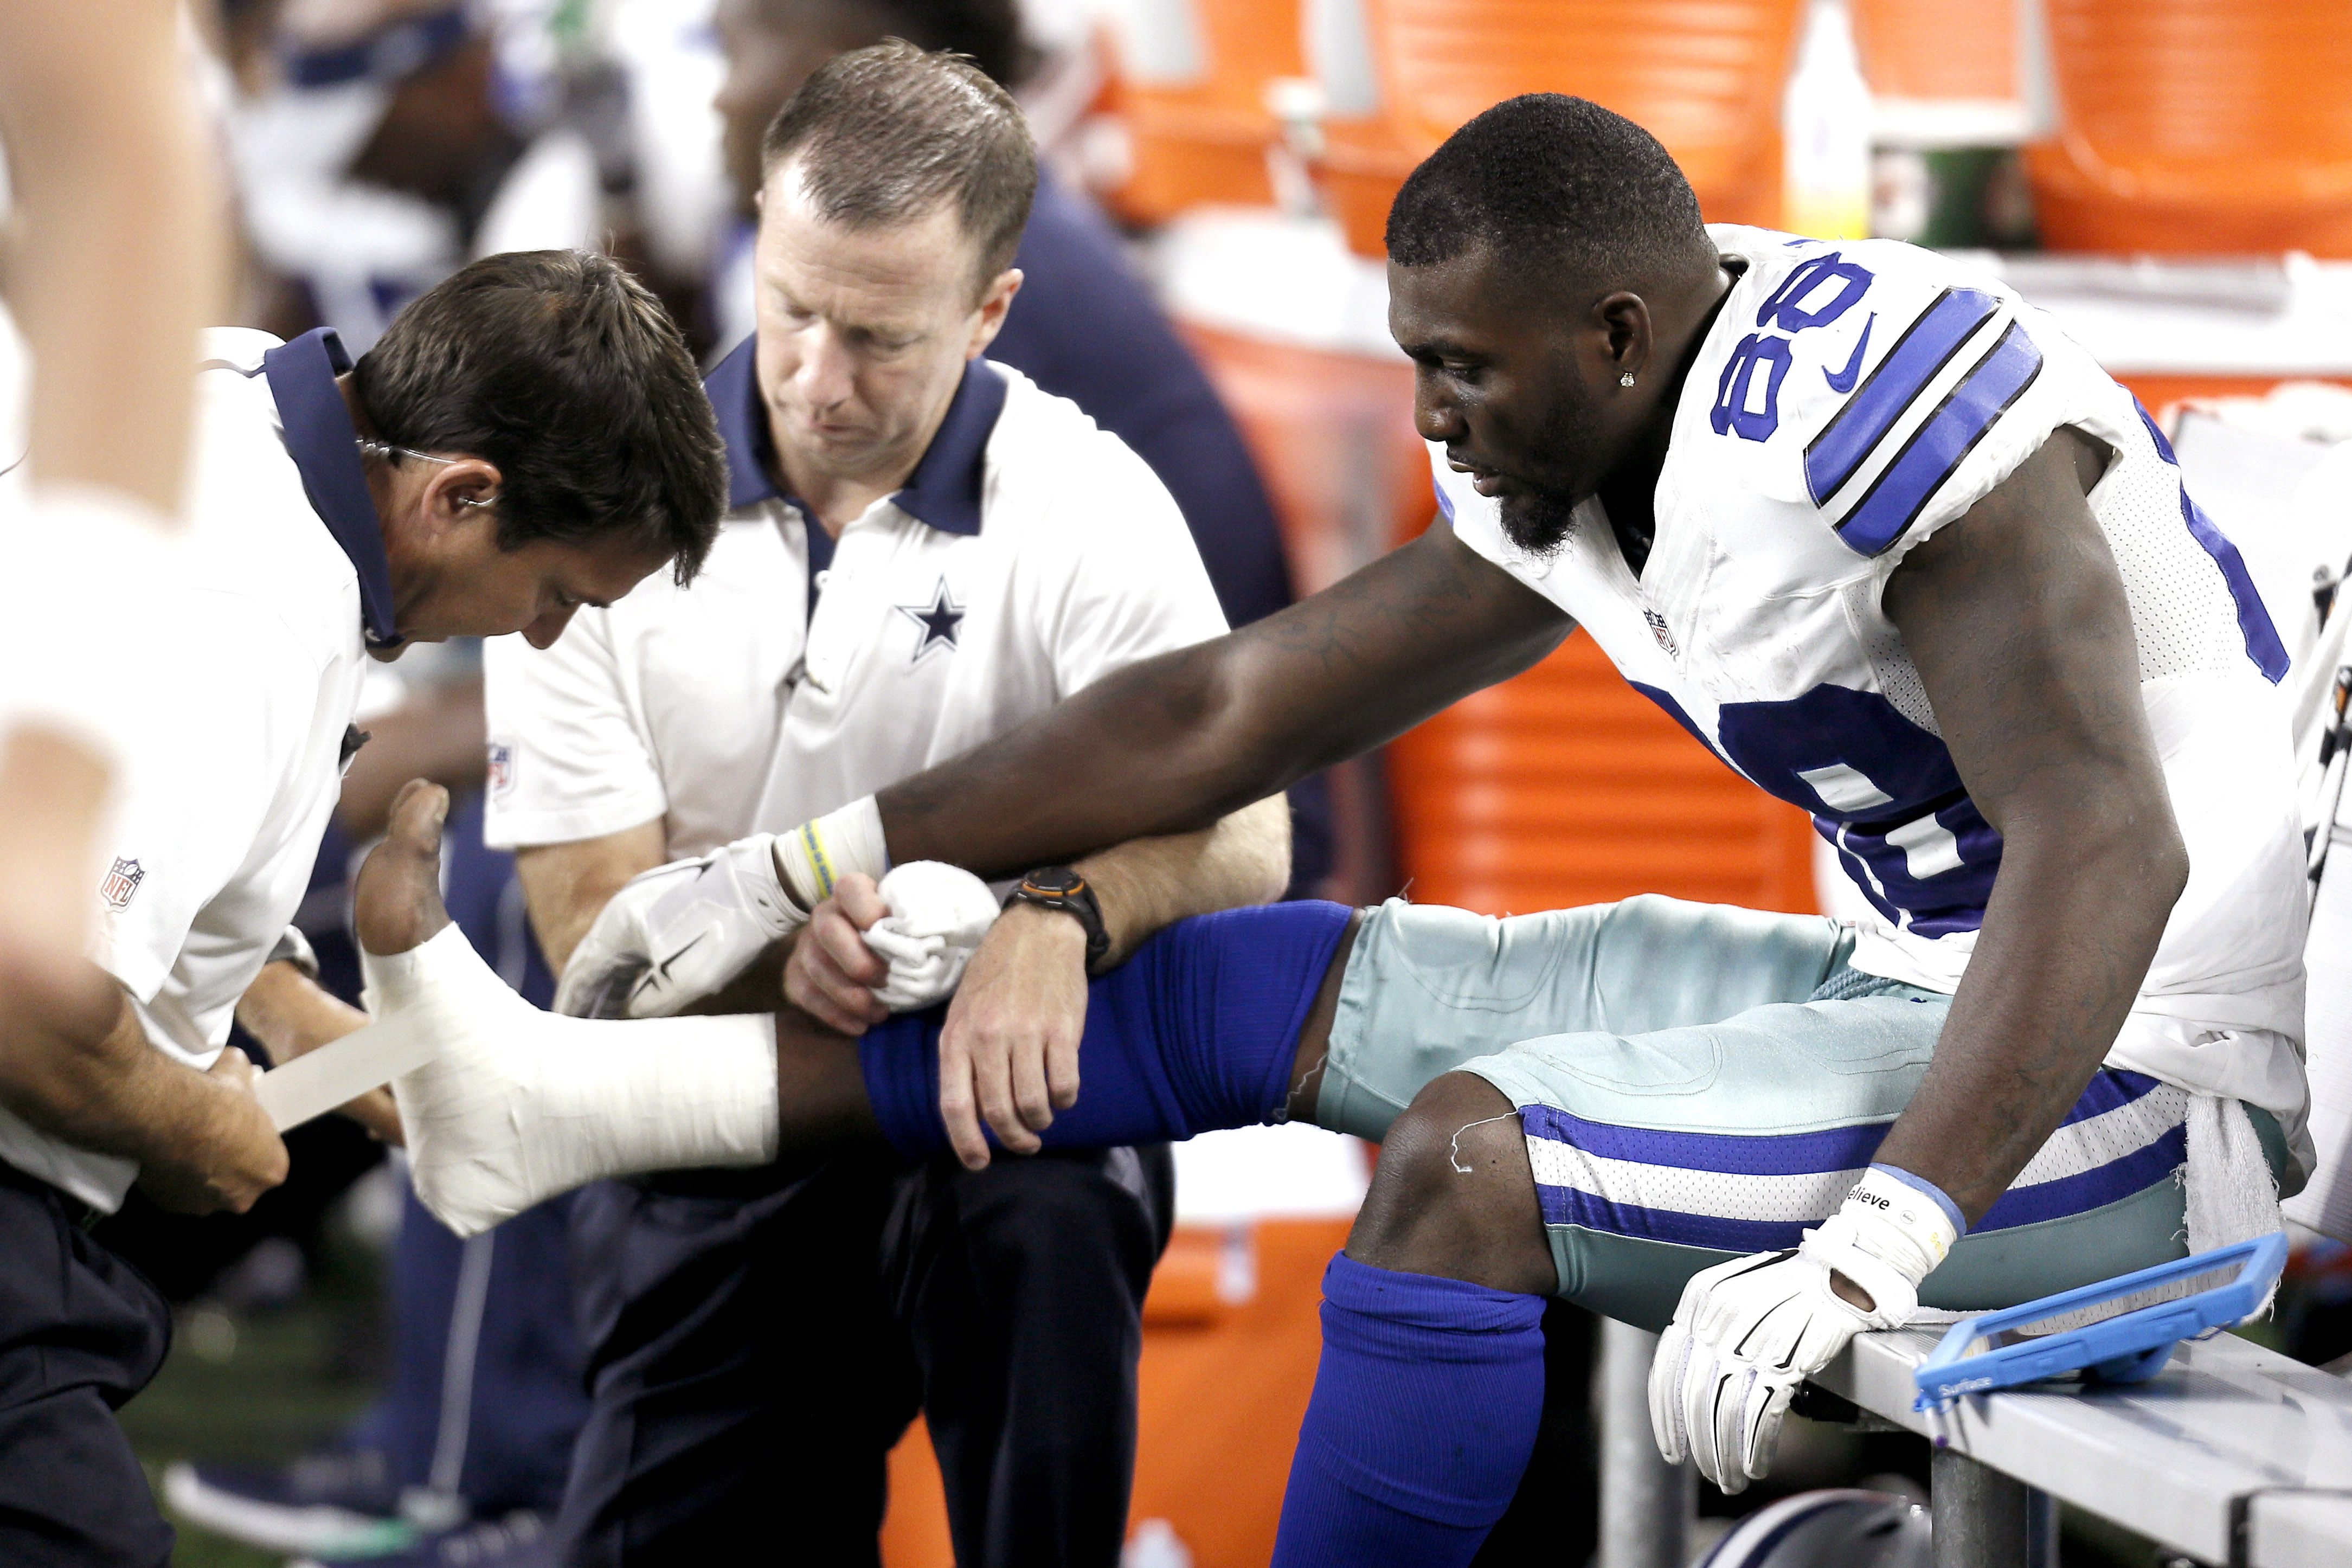 Dallas Cowboys wide receiver Dez Bryant (88) is tended to on the sideline after injuring his foot during the second half of an NFL football game against the New York Giants Sunday, Sept. 13, 2015, in Arlington, Texas. (AP Photo/Brandon Wade)